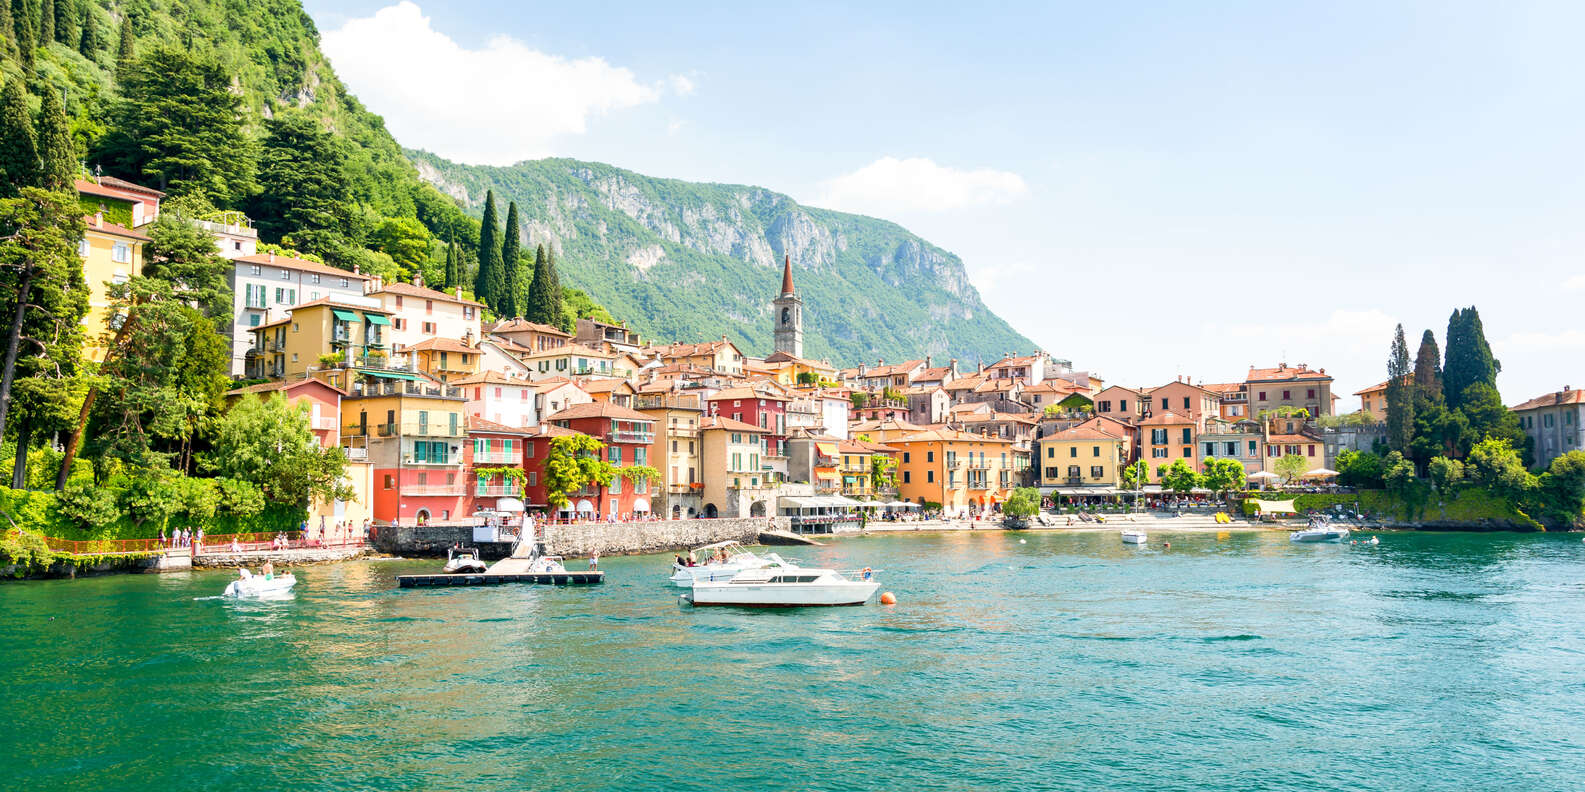 What to do in Bellagio